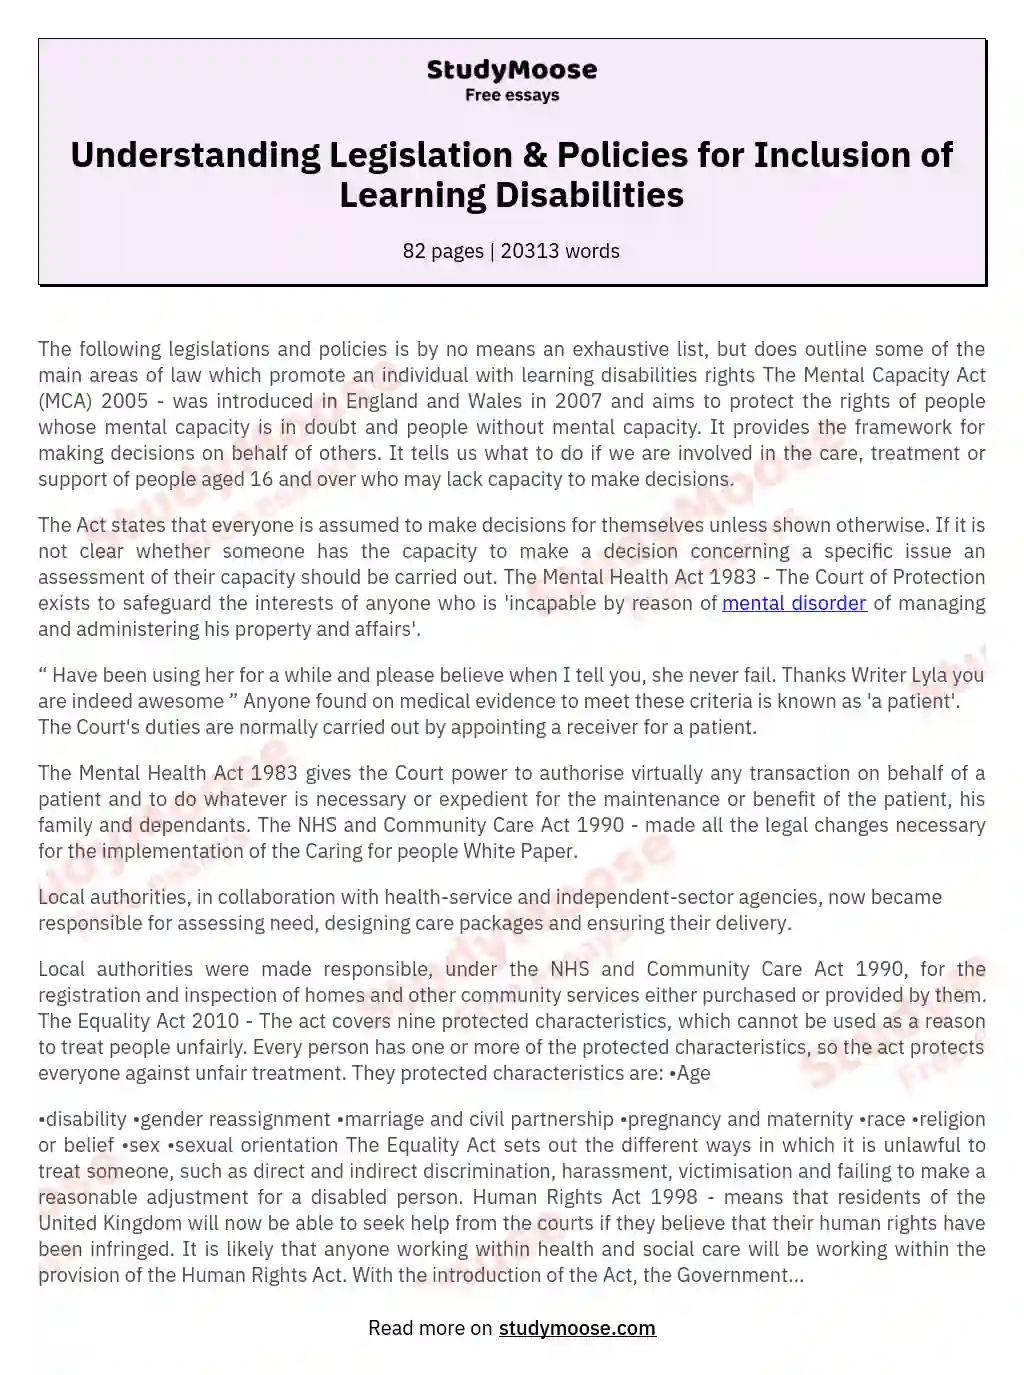 Understanding Legislation & Policies for Inclusion of Learning Disabilities essay